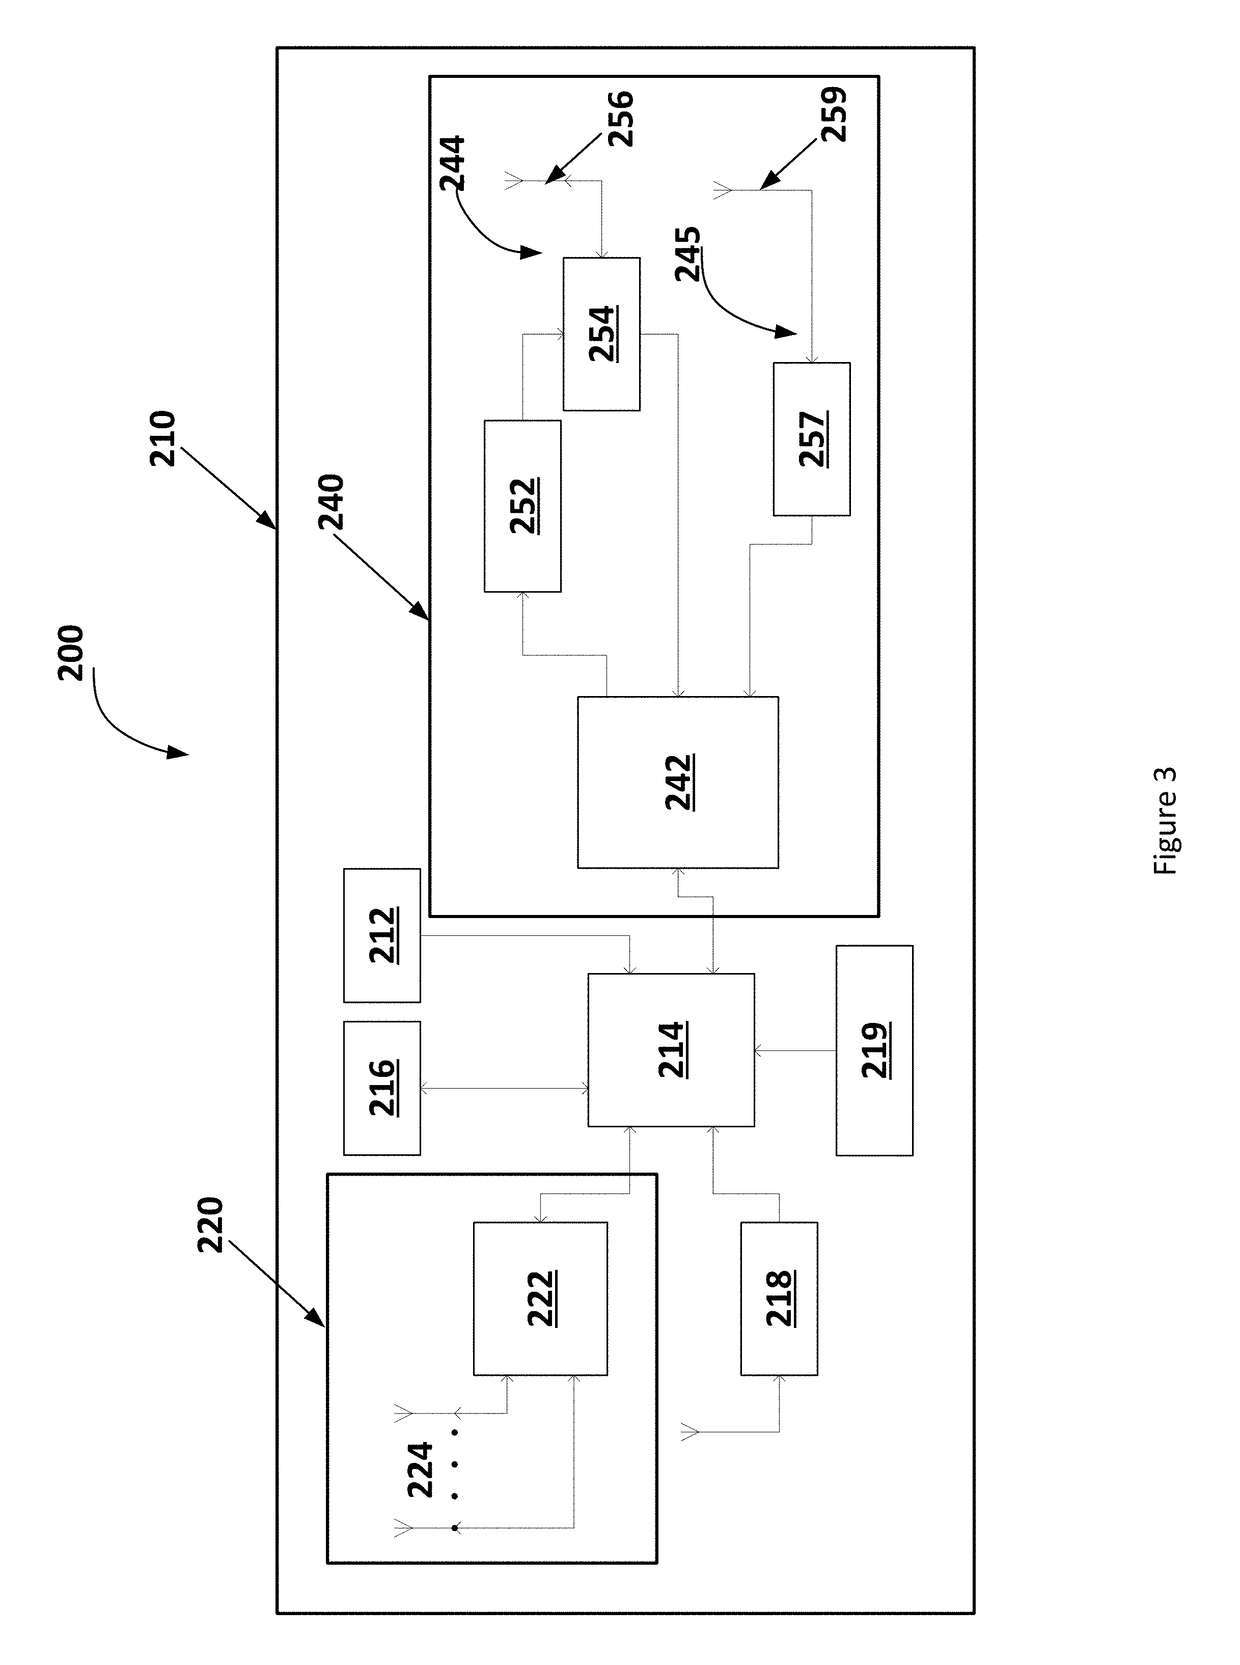 Extended range wireless inter-networking system and device